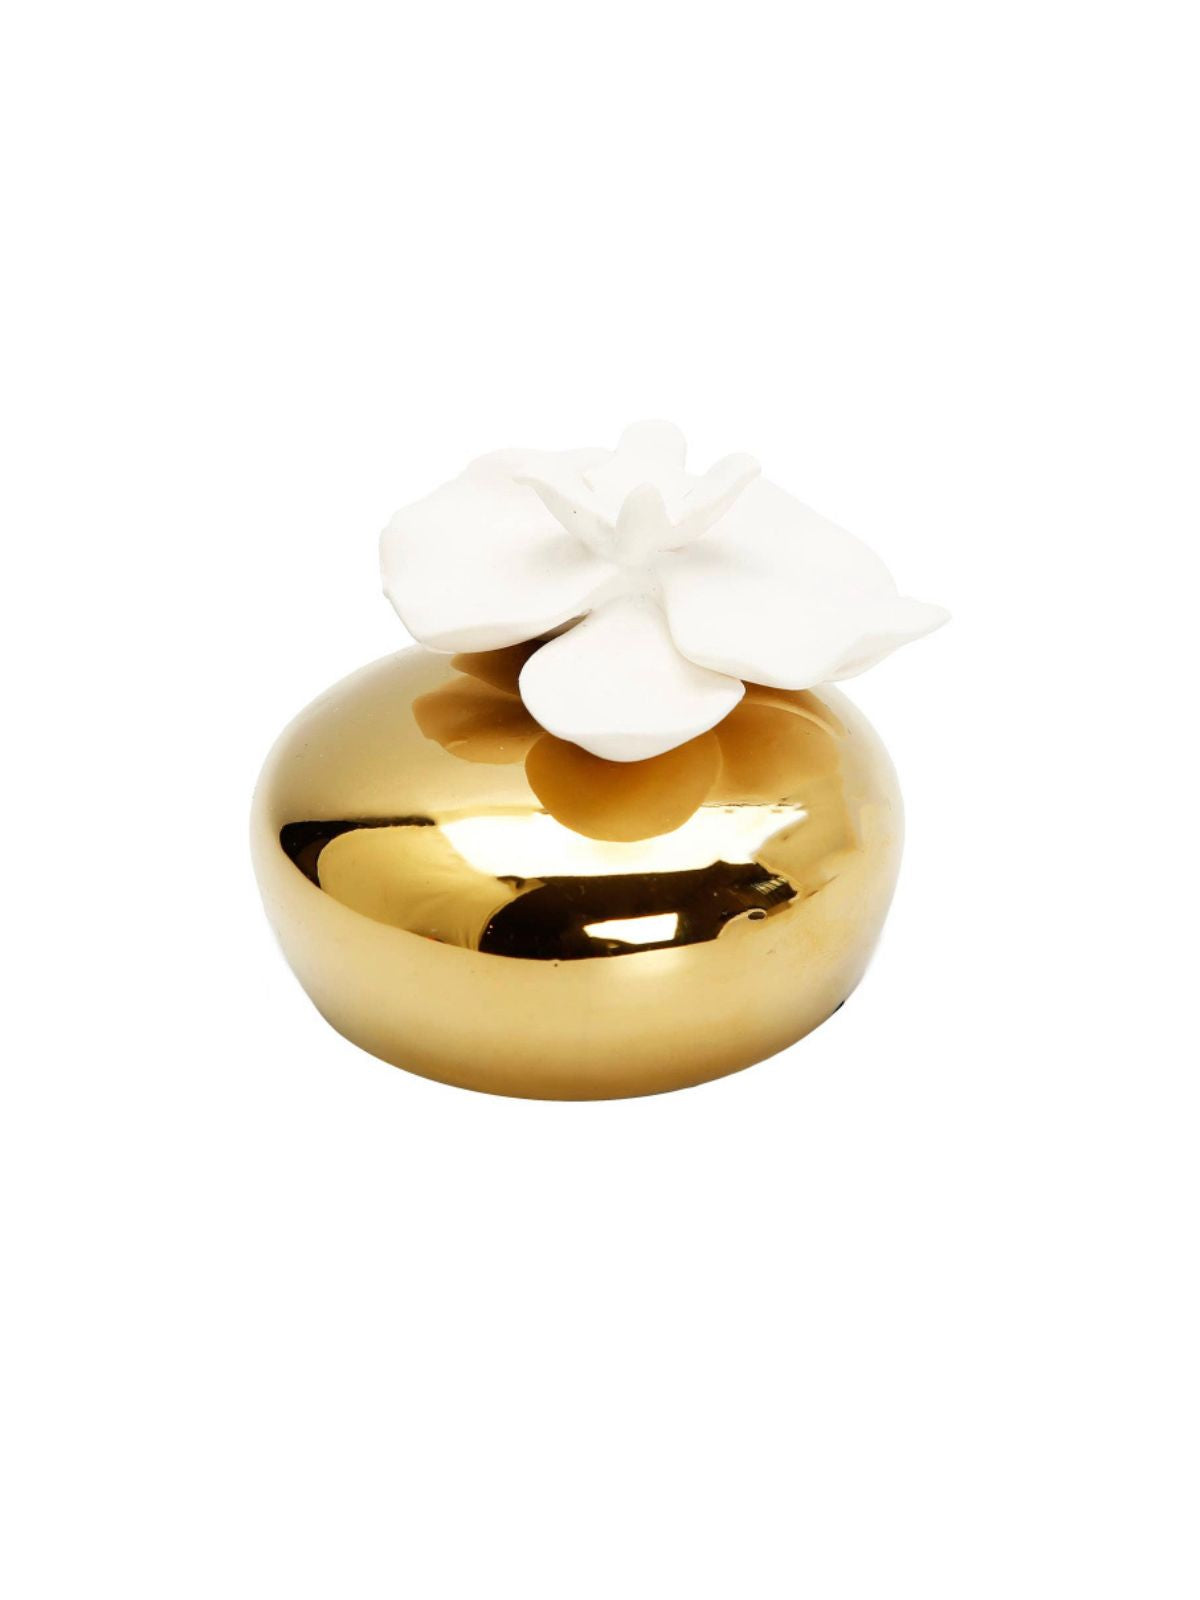 Matte gold ceramic diffuser with a white magnolia flower top that dispenses a luxury fragranced oil of Iris and Rose scent. 